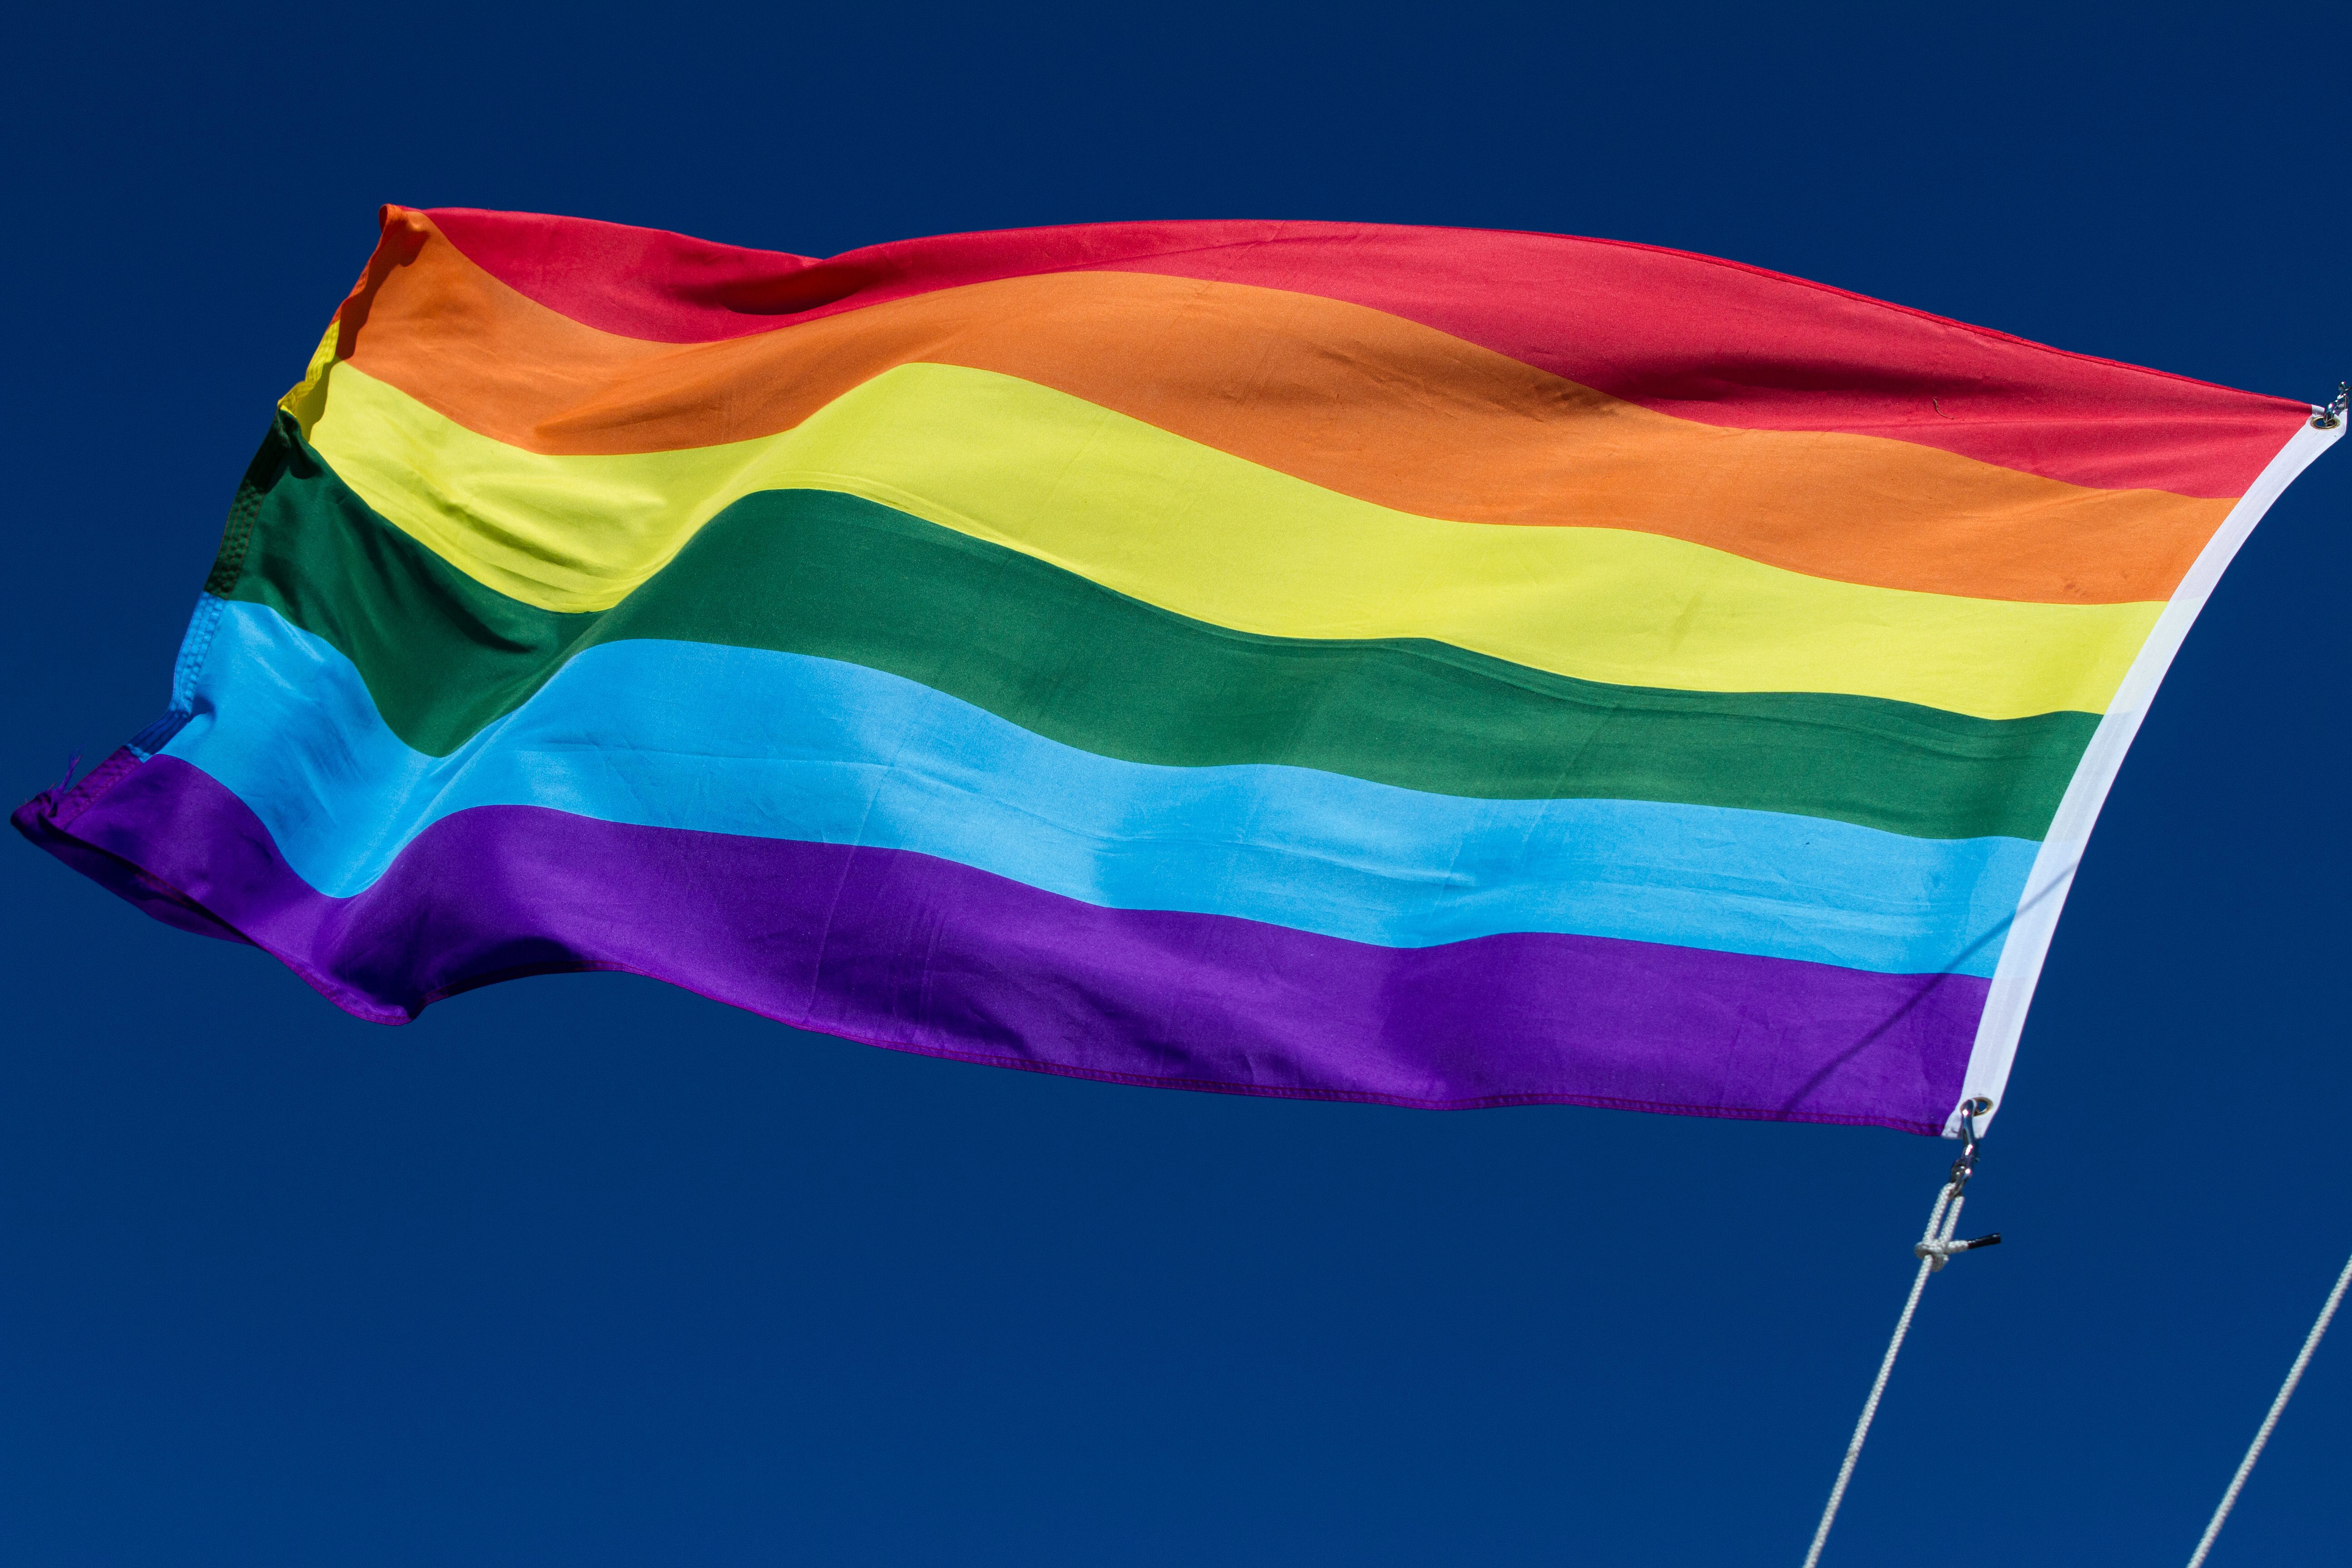 pictures of the real gay flag